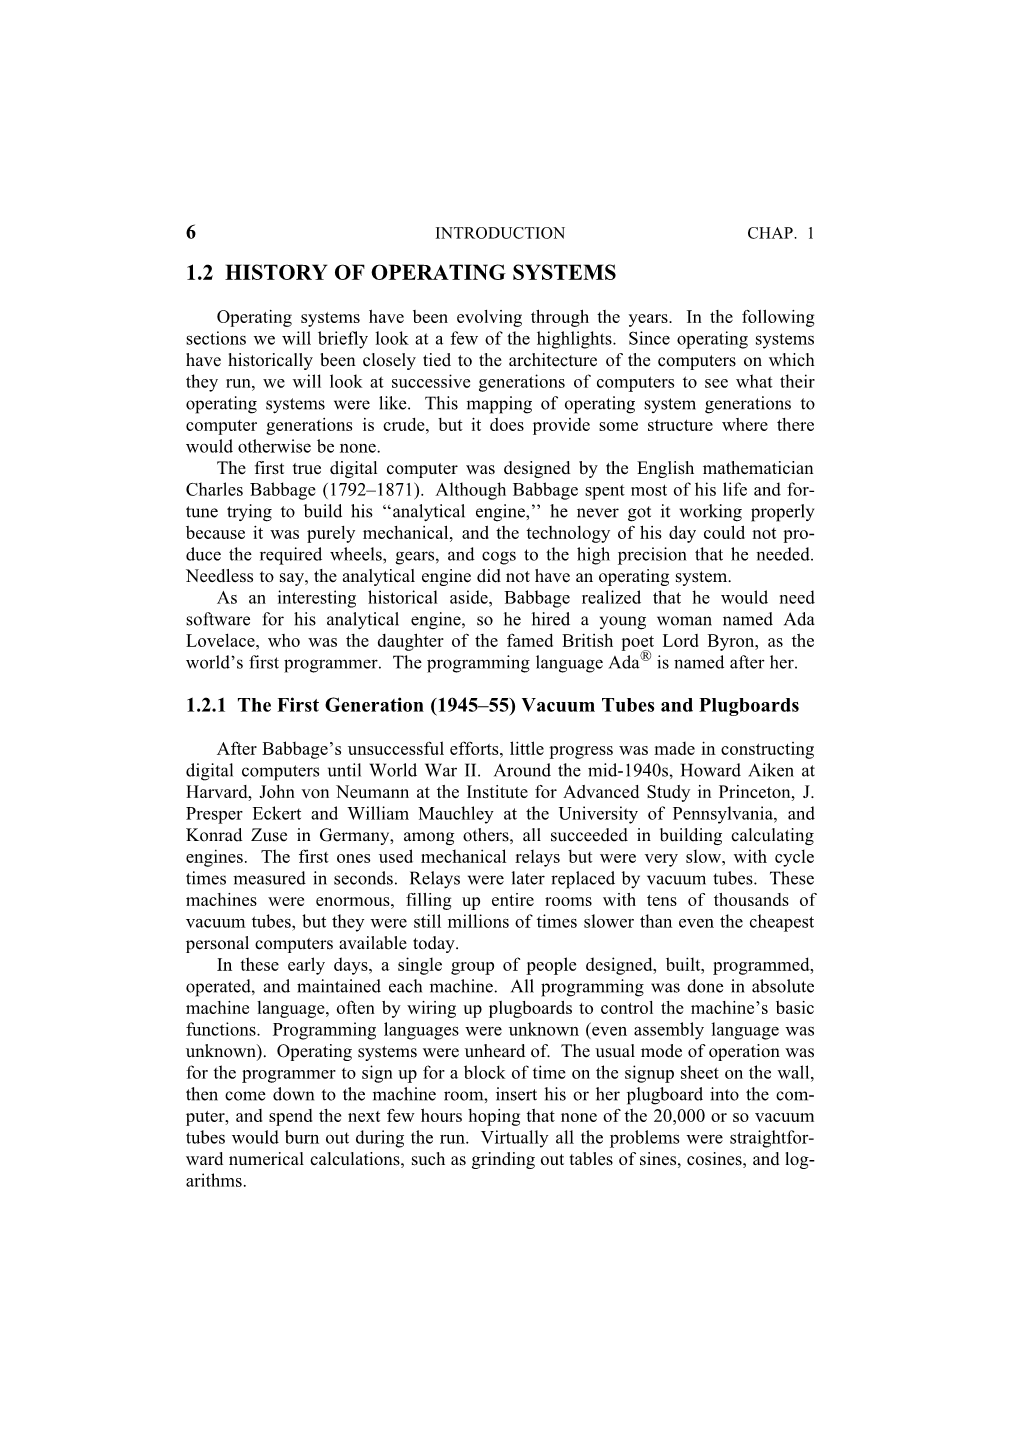 1.2 History of Operating Systems